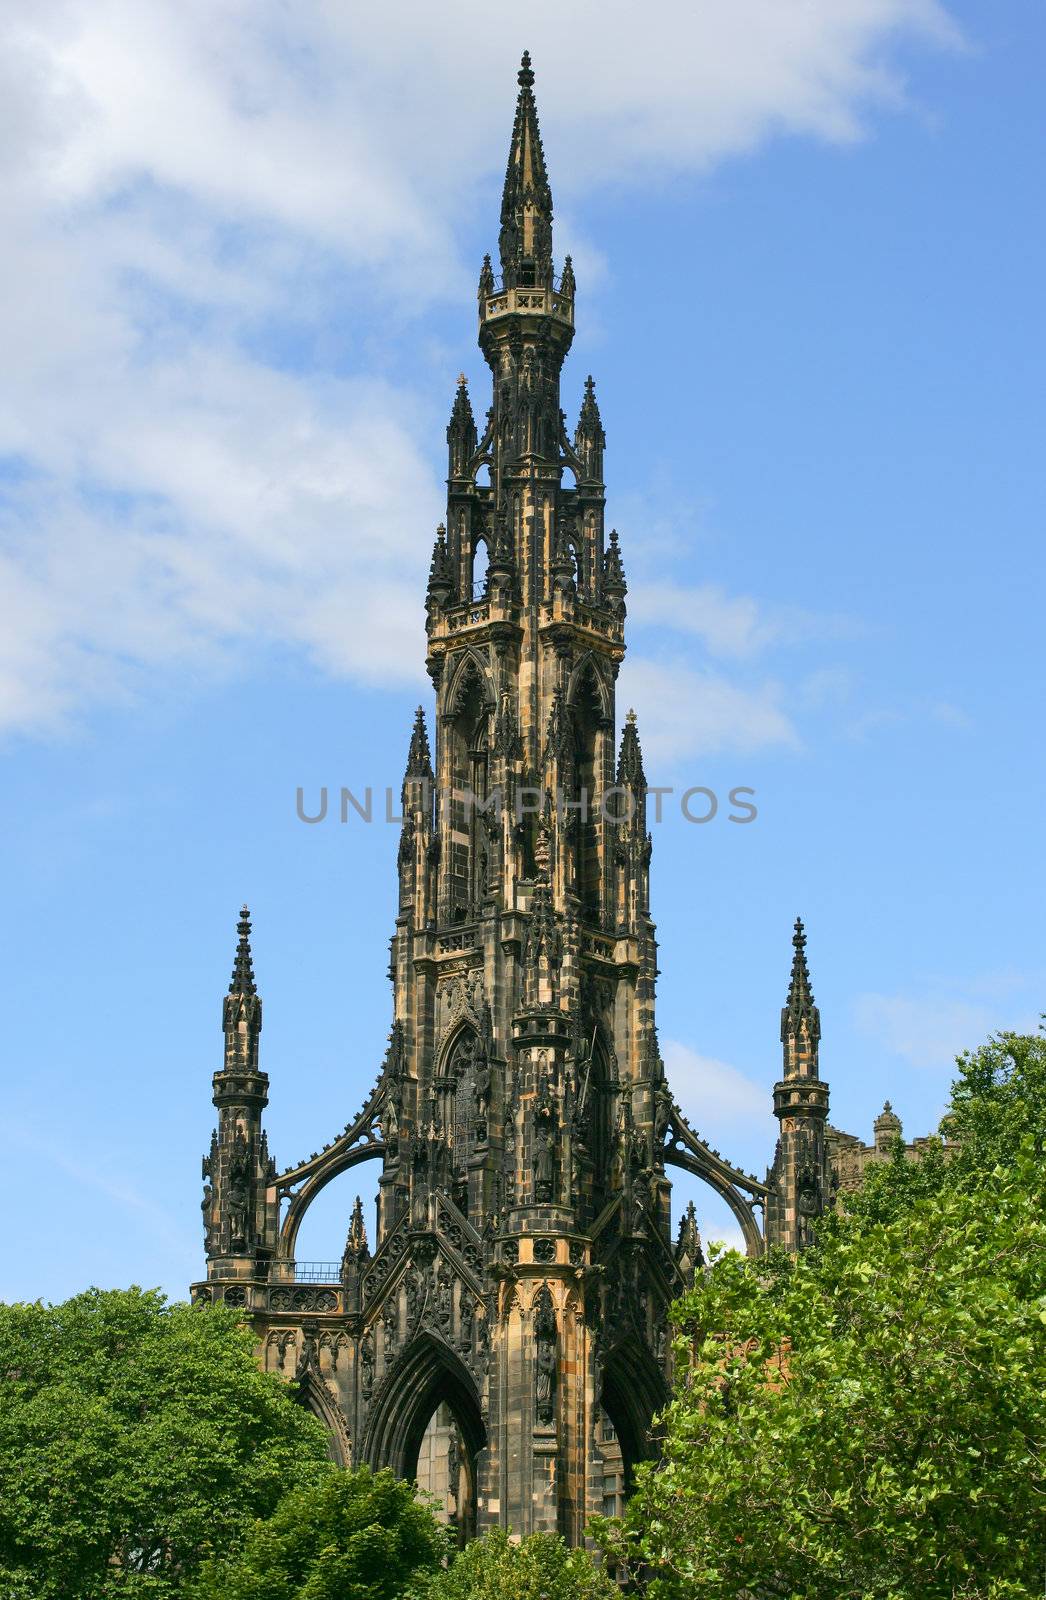 An image of the Scott Monument in the beautiful city of Edinburgh, Scotland.
